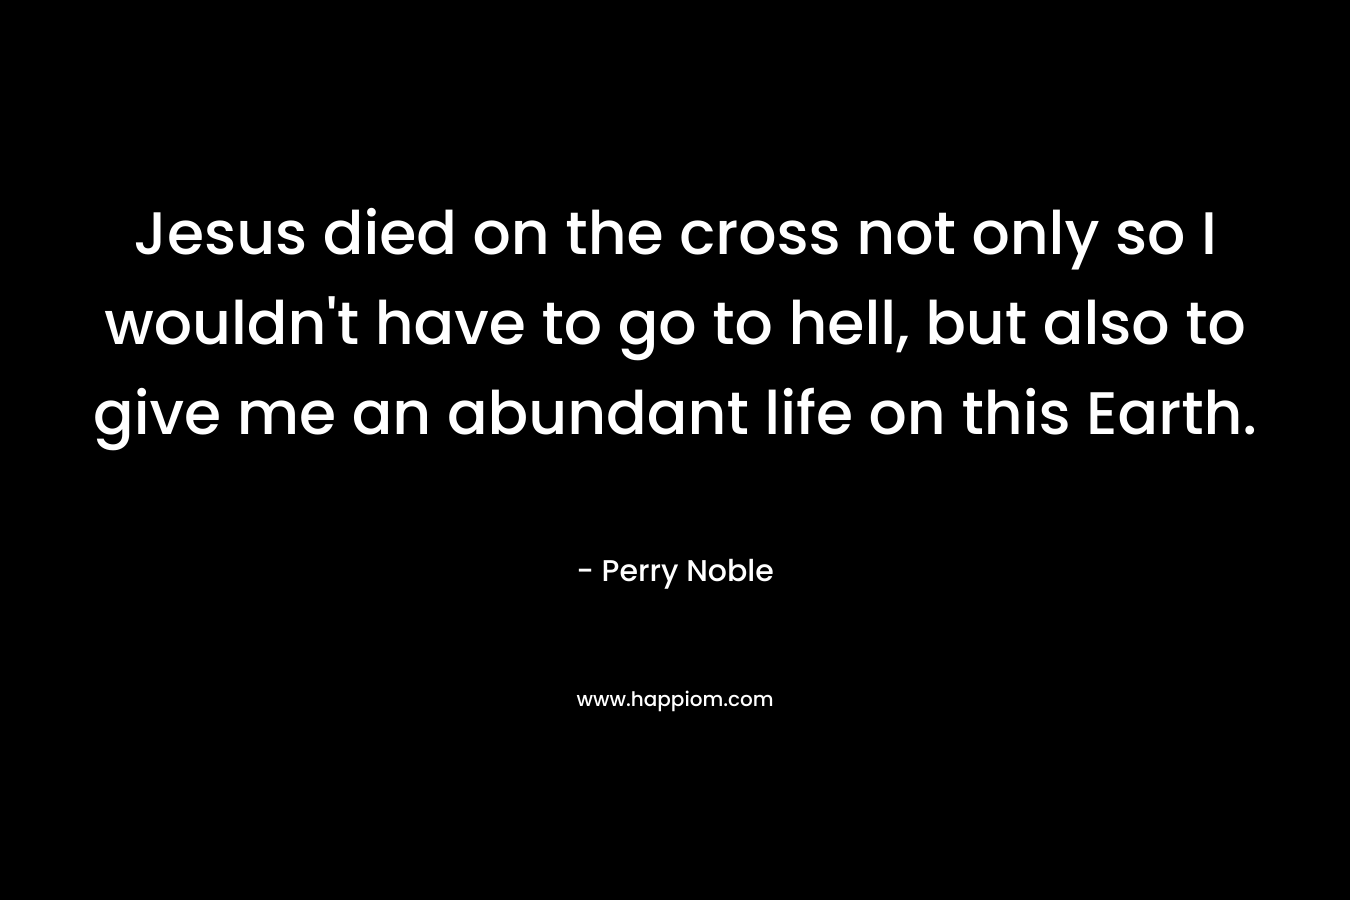 Jesus died on the cross not only so I wouldn’t have to go to hell, but also to give me an abundant life on this Earth. – Perry Noble